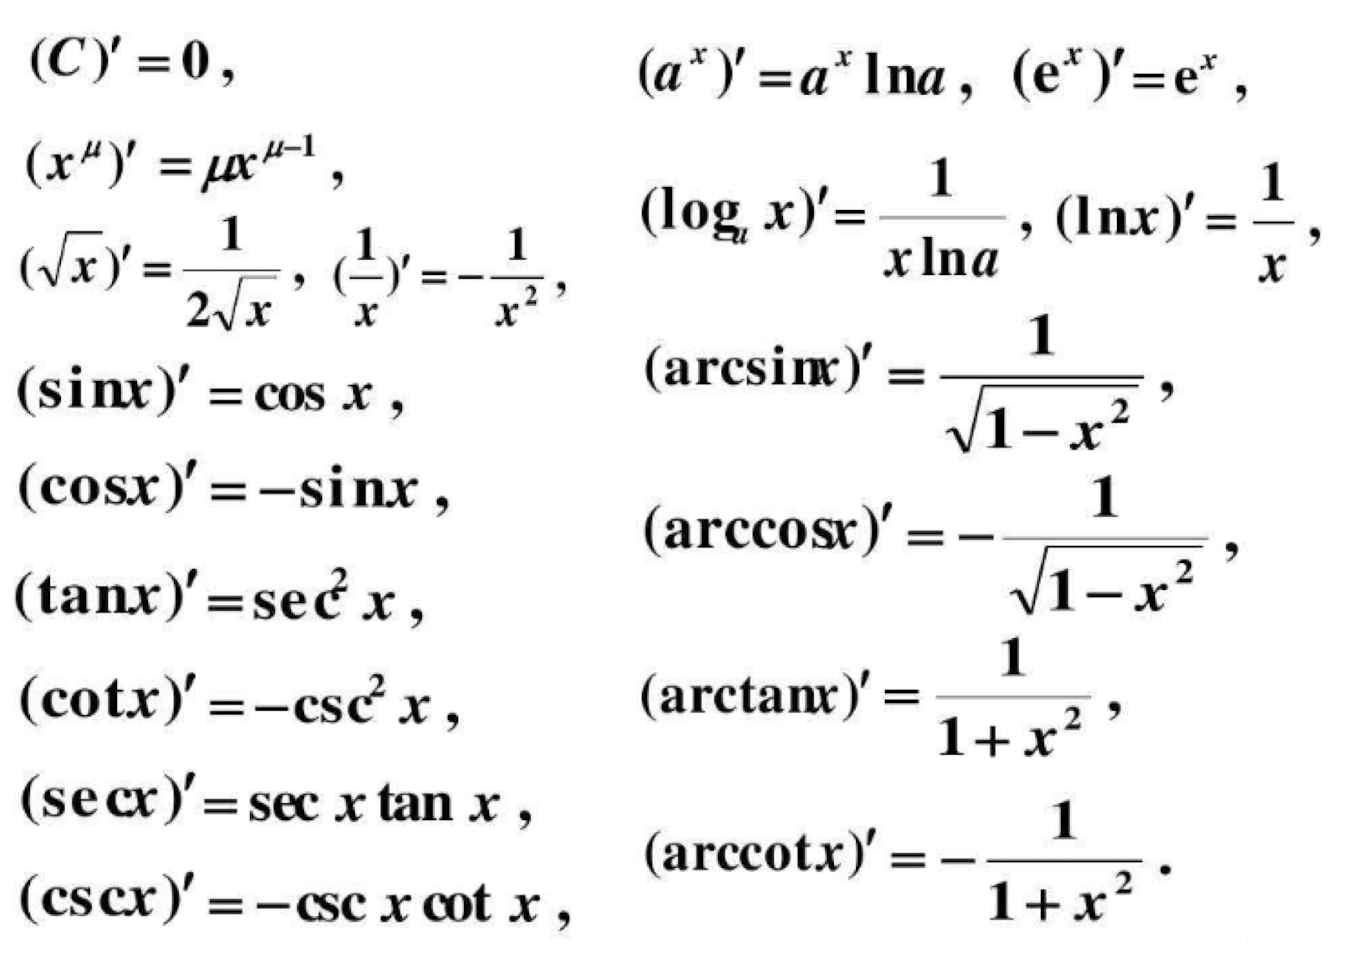 Derivatives of Common Functions